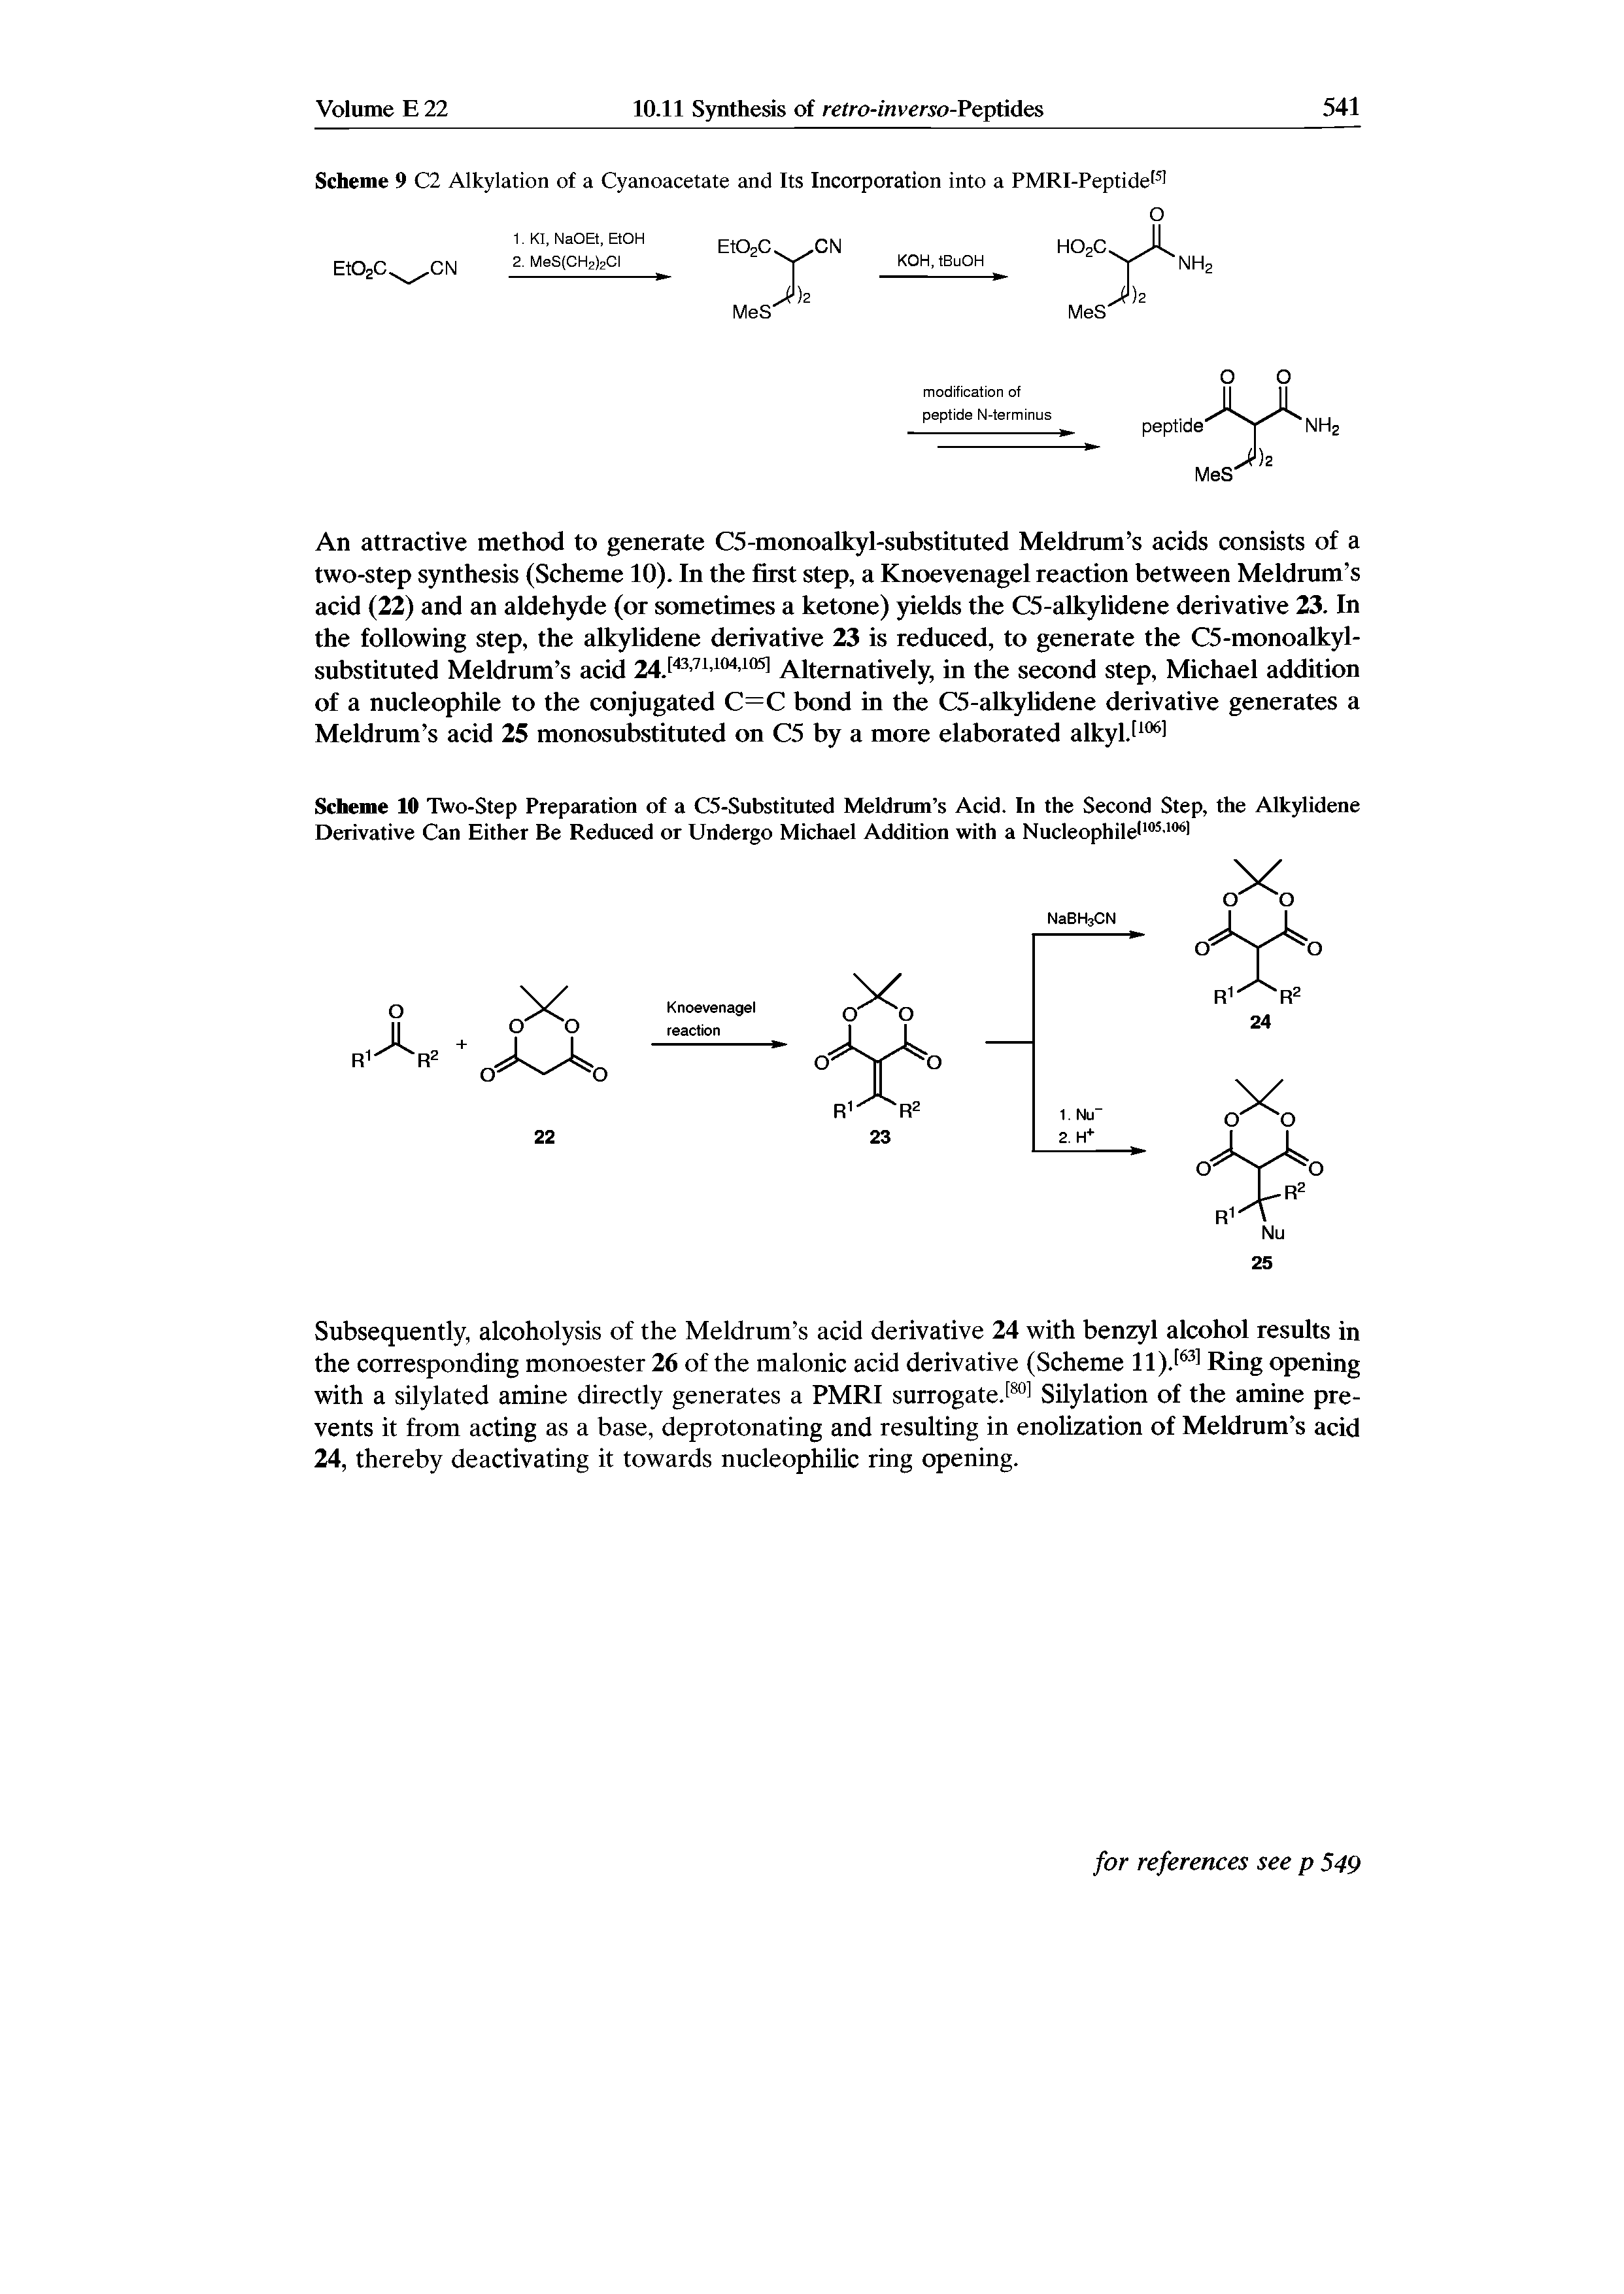 Scheme 10 Two-Step Preparation of a C5-Substituted Meldrum s Acid. In the Second Step, the Alkylidene Derivative Can Either Be Reduced or Undergo Michael Addition with a Nucleophile11051061...